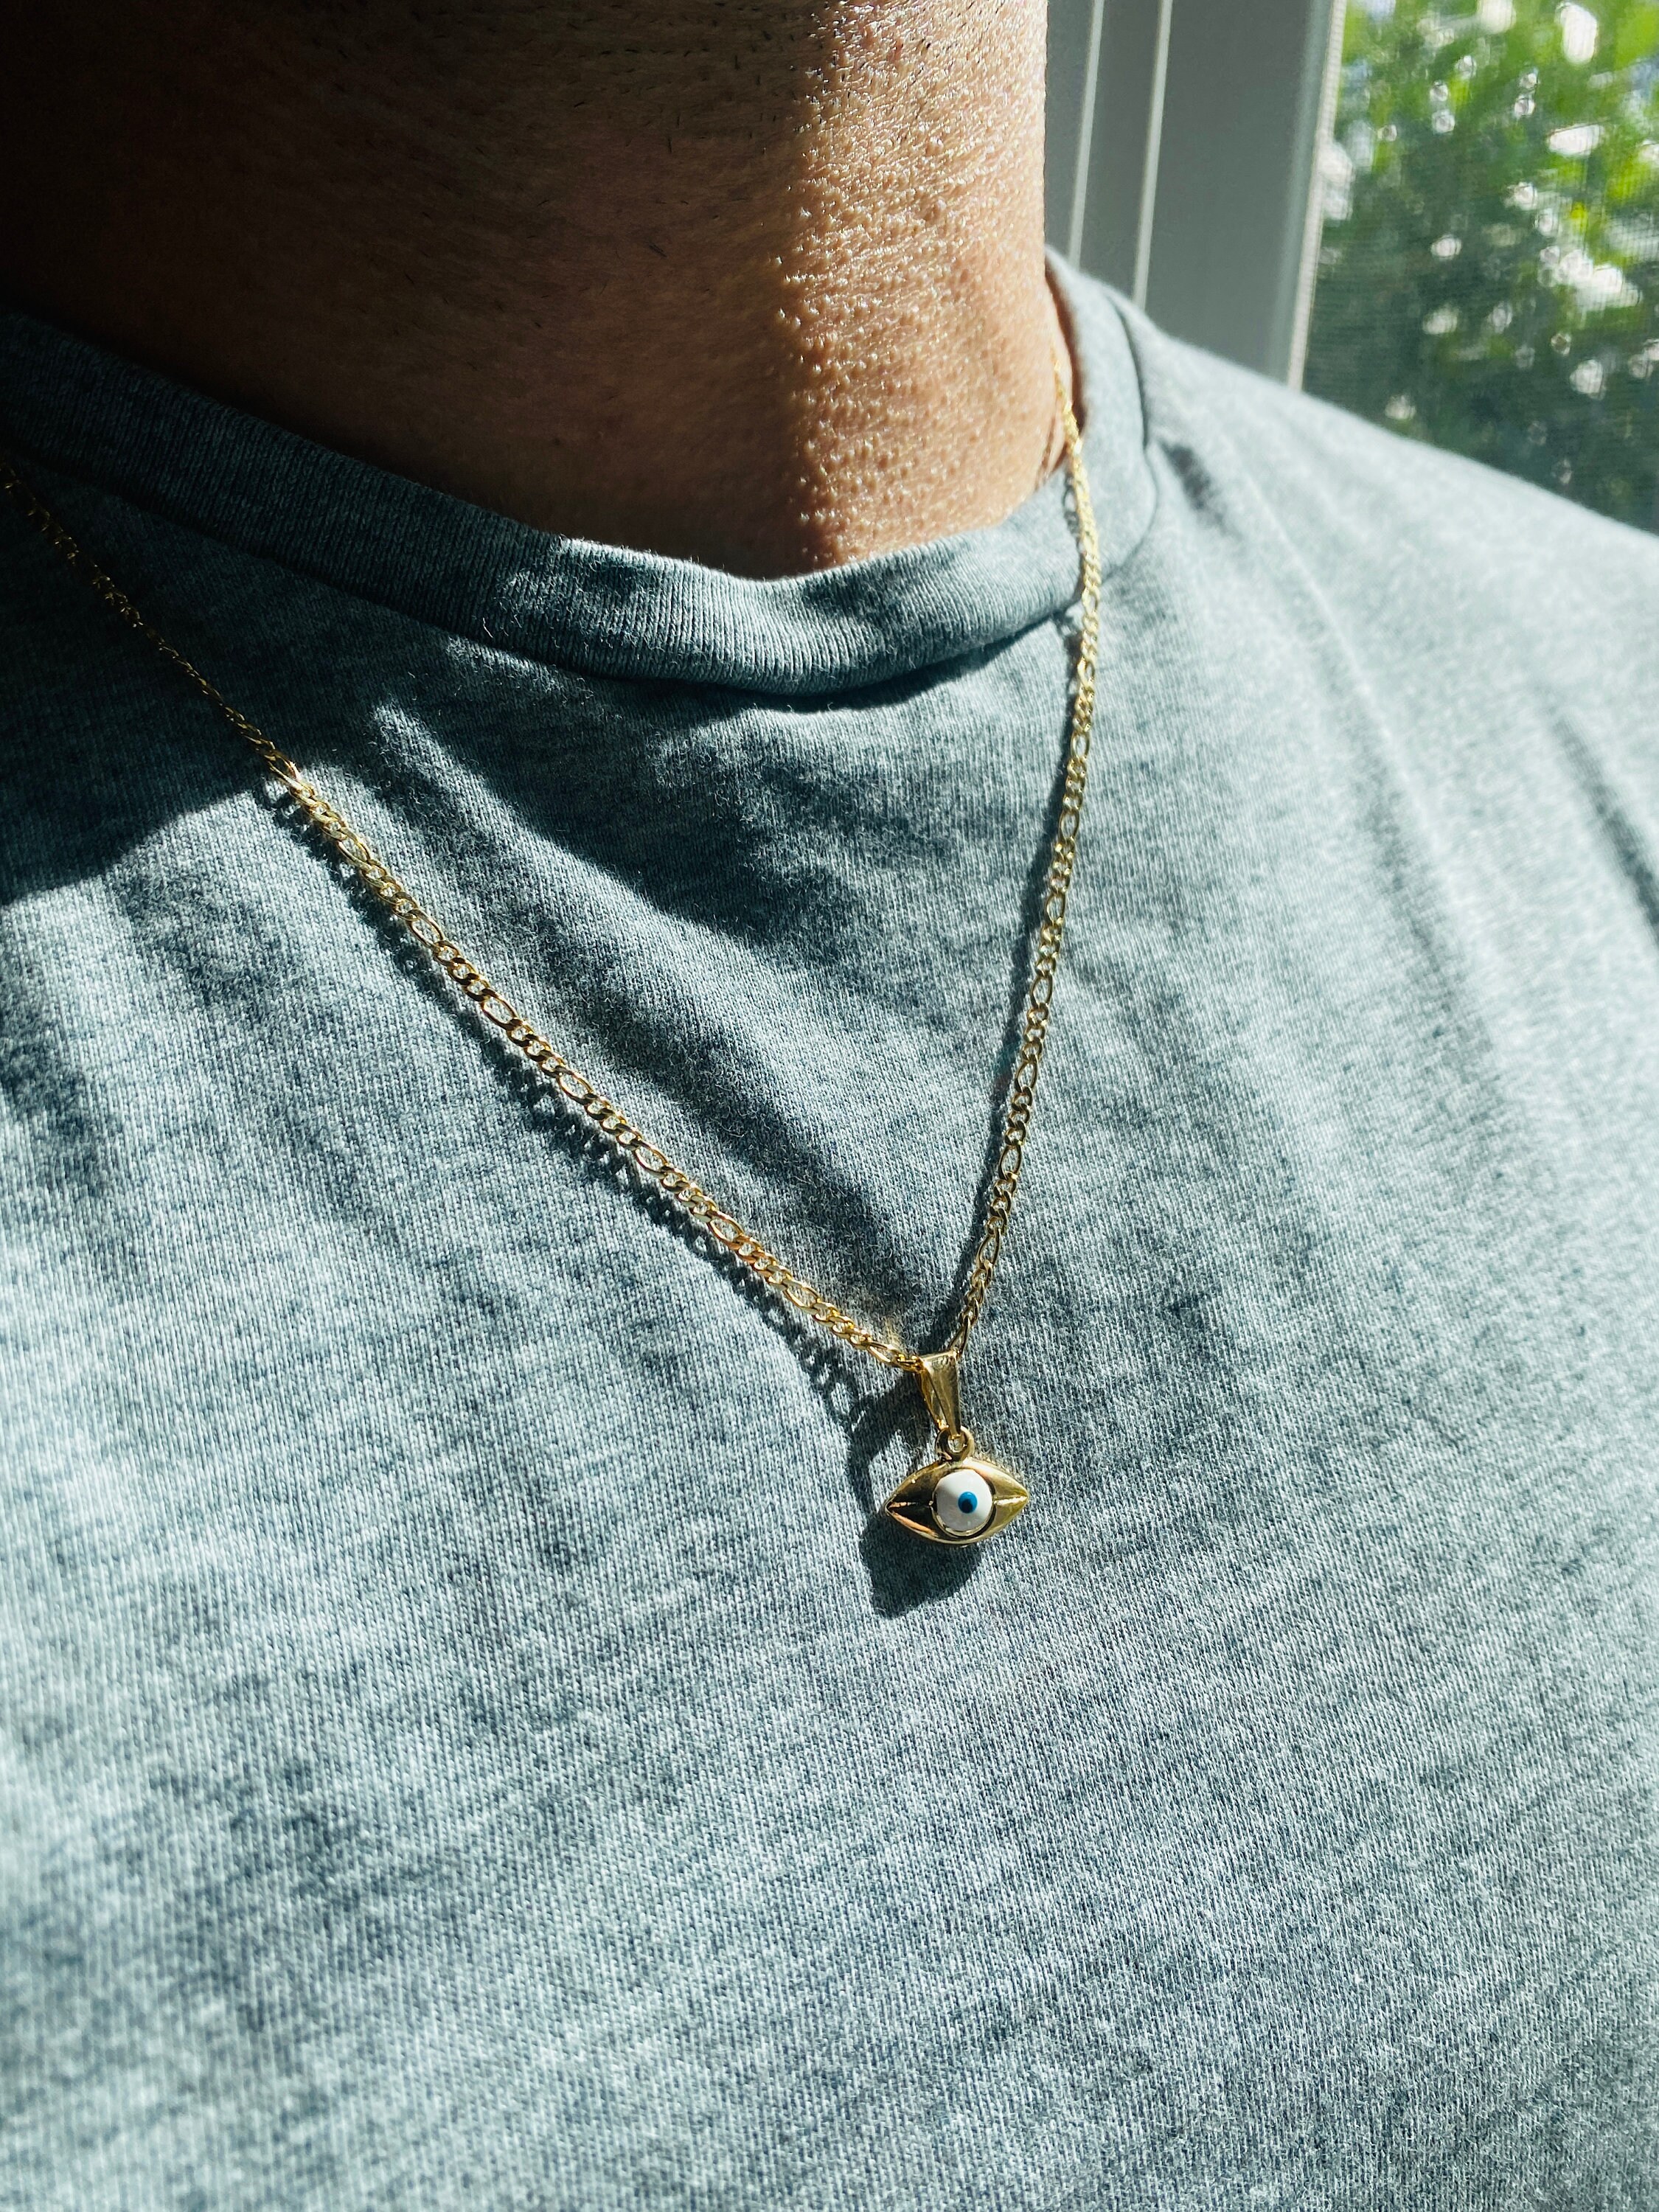 Rope Necklace, Rope Chain, Men's Chain, Gold Filled Necklace, Mens Jewelry,  Mens Necklace, Mens Gift, Jewelry for Men,necklace for Men, Gift 